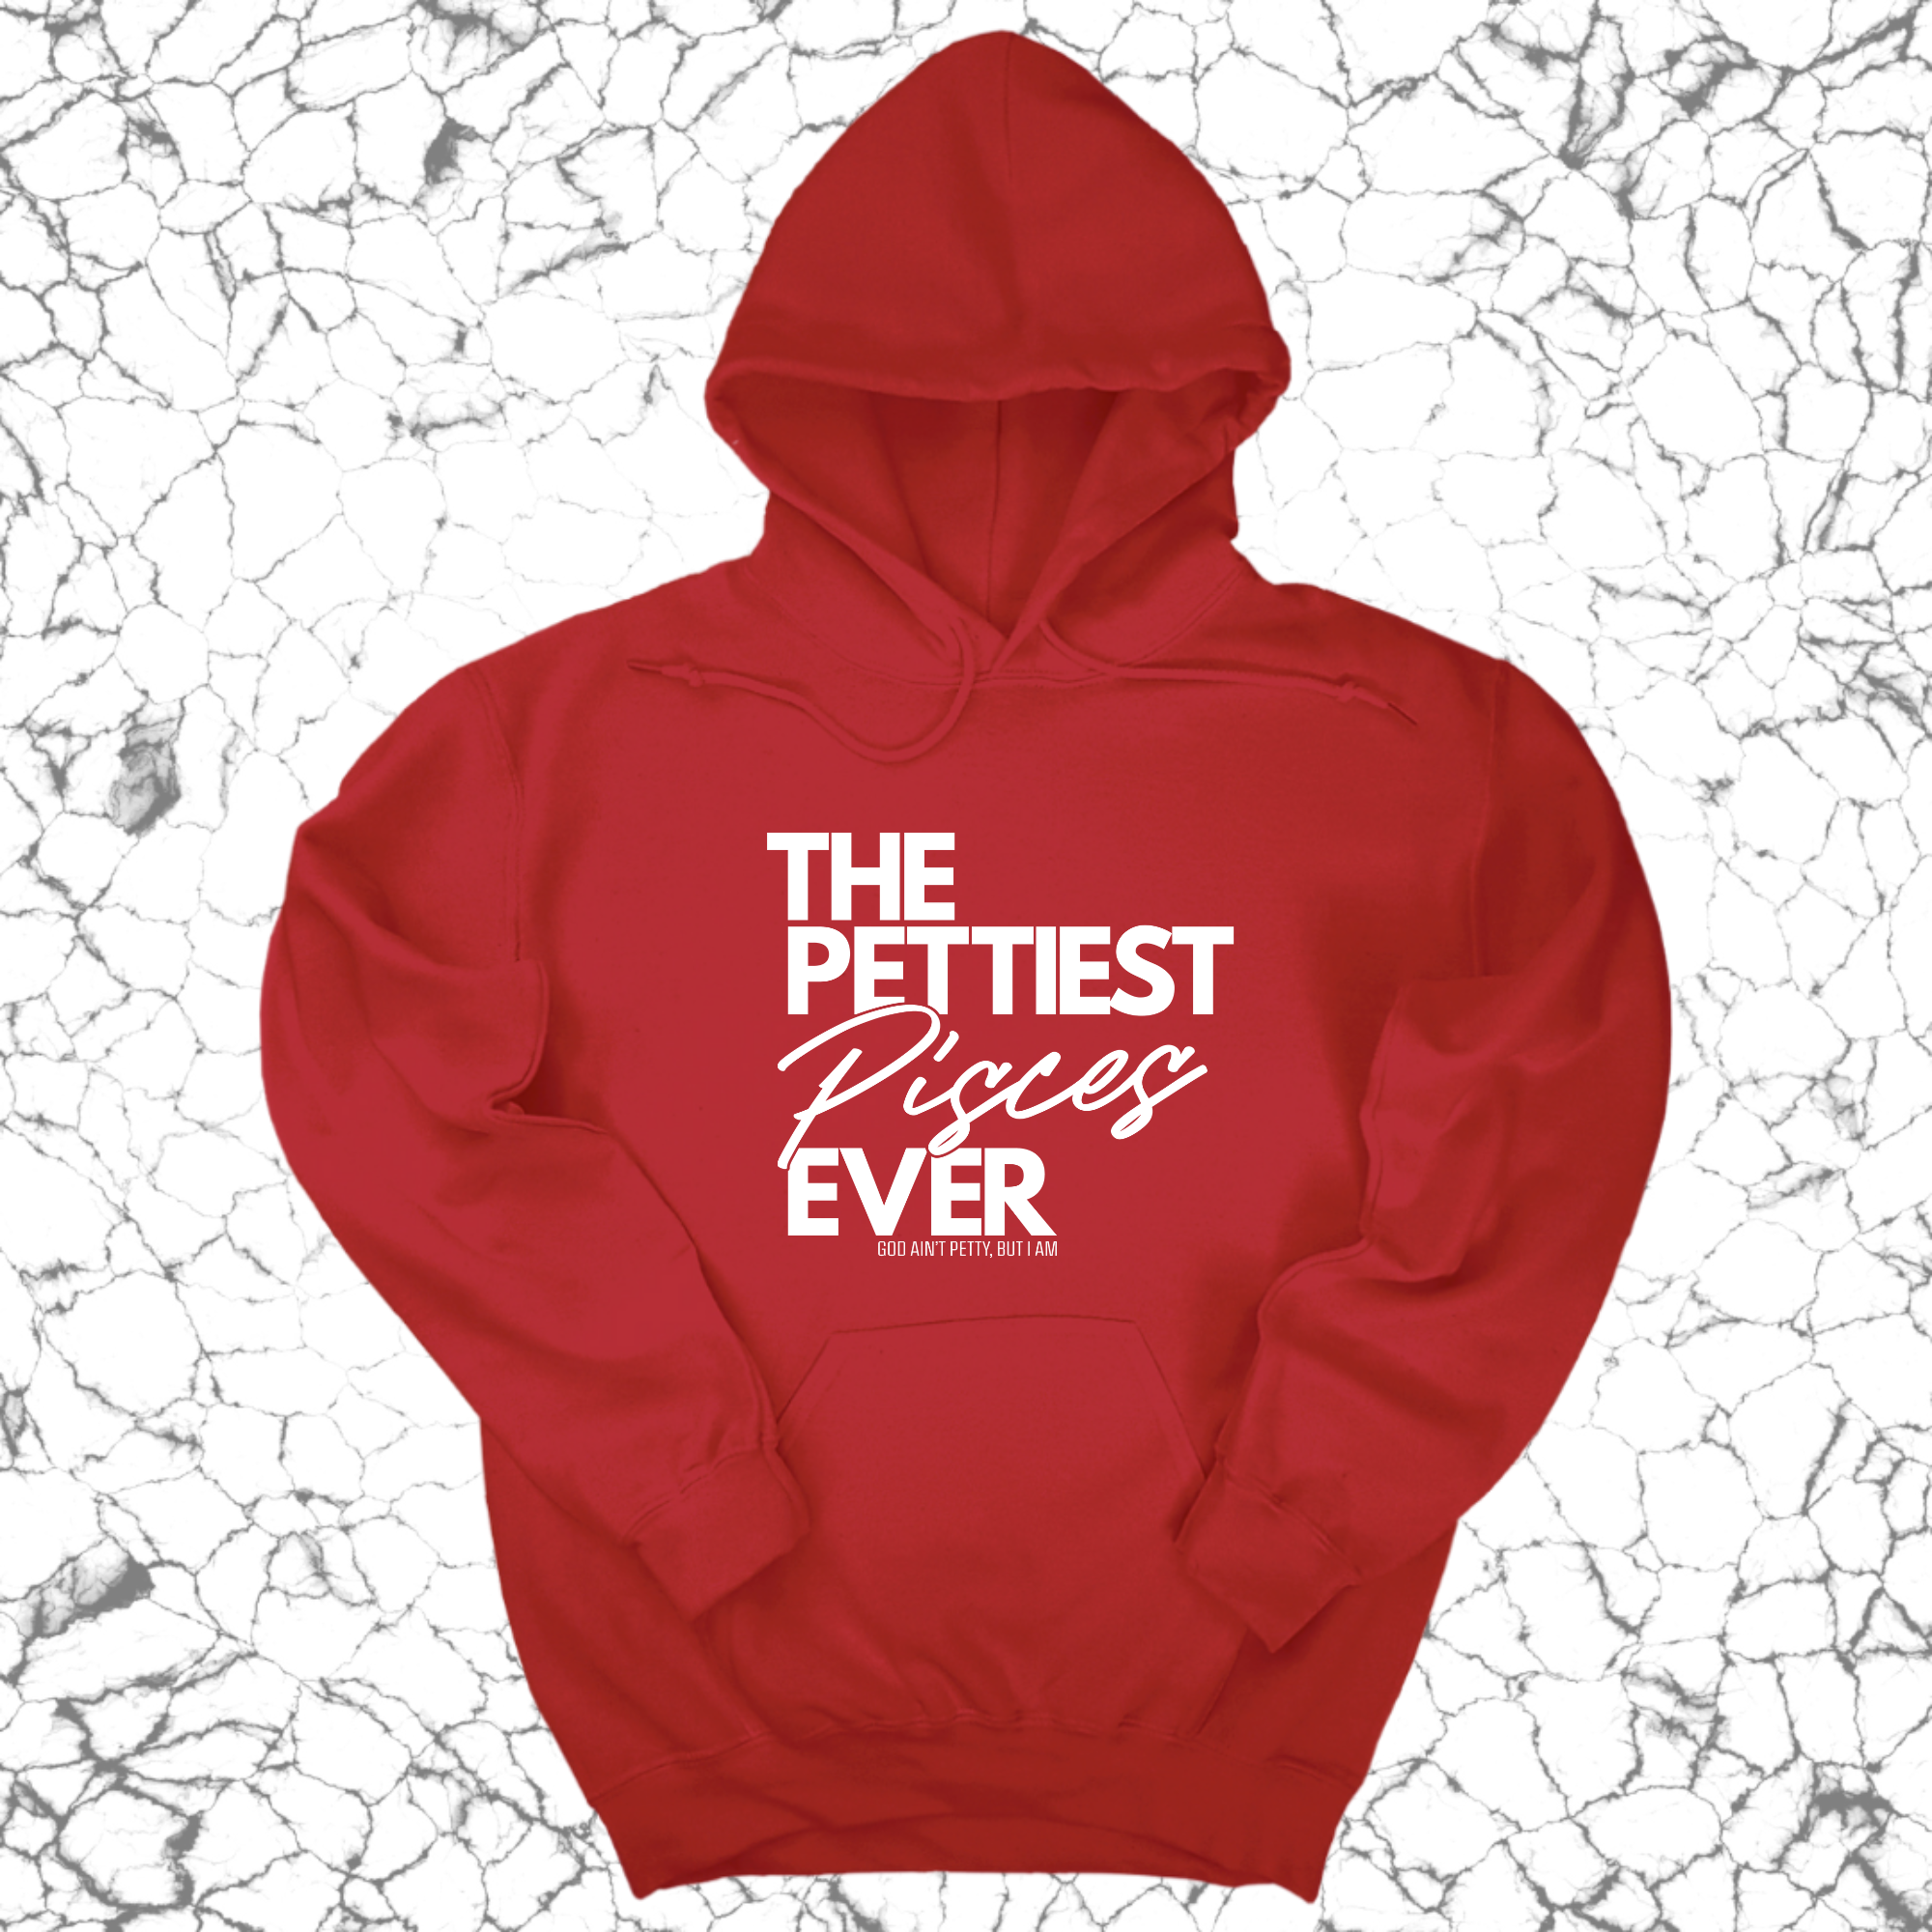 The Pettiest Pisces Ever Unisex Hoodie-Hoodie-The Original God Ain't Petty But I Am